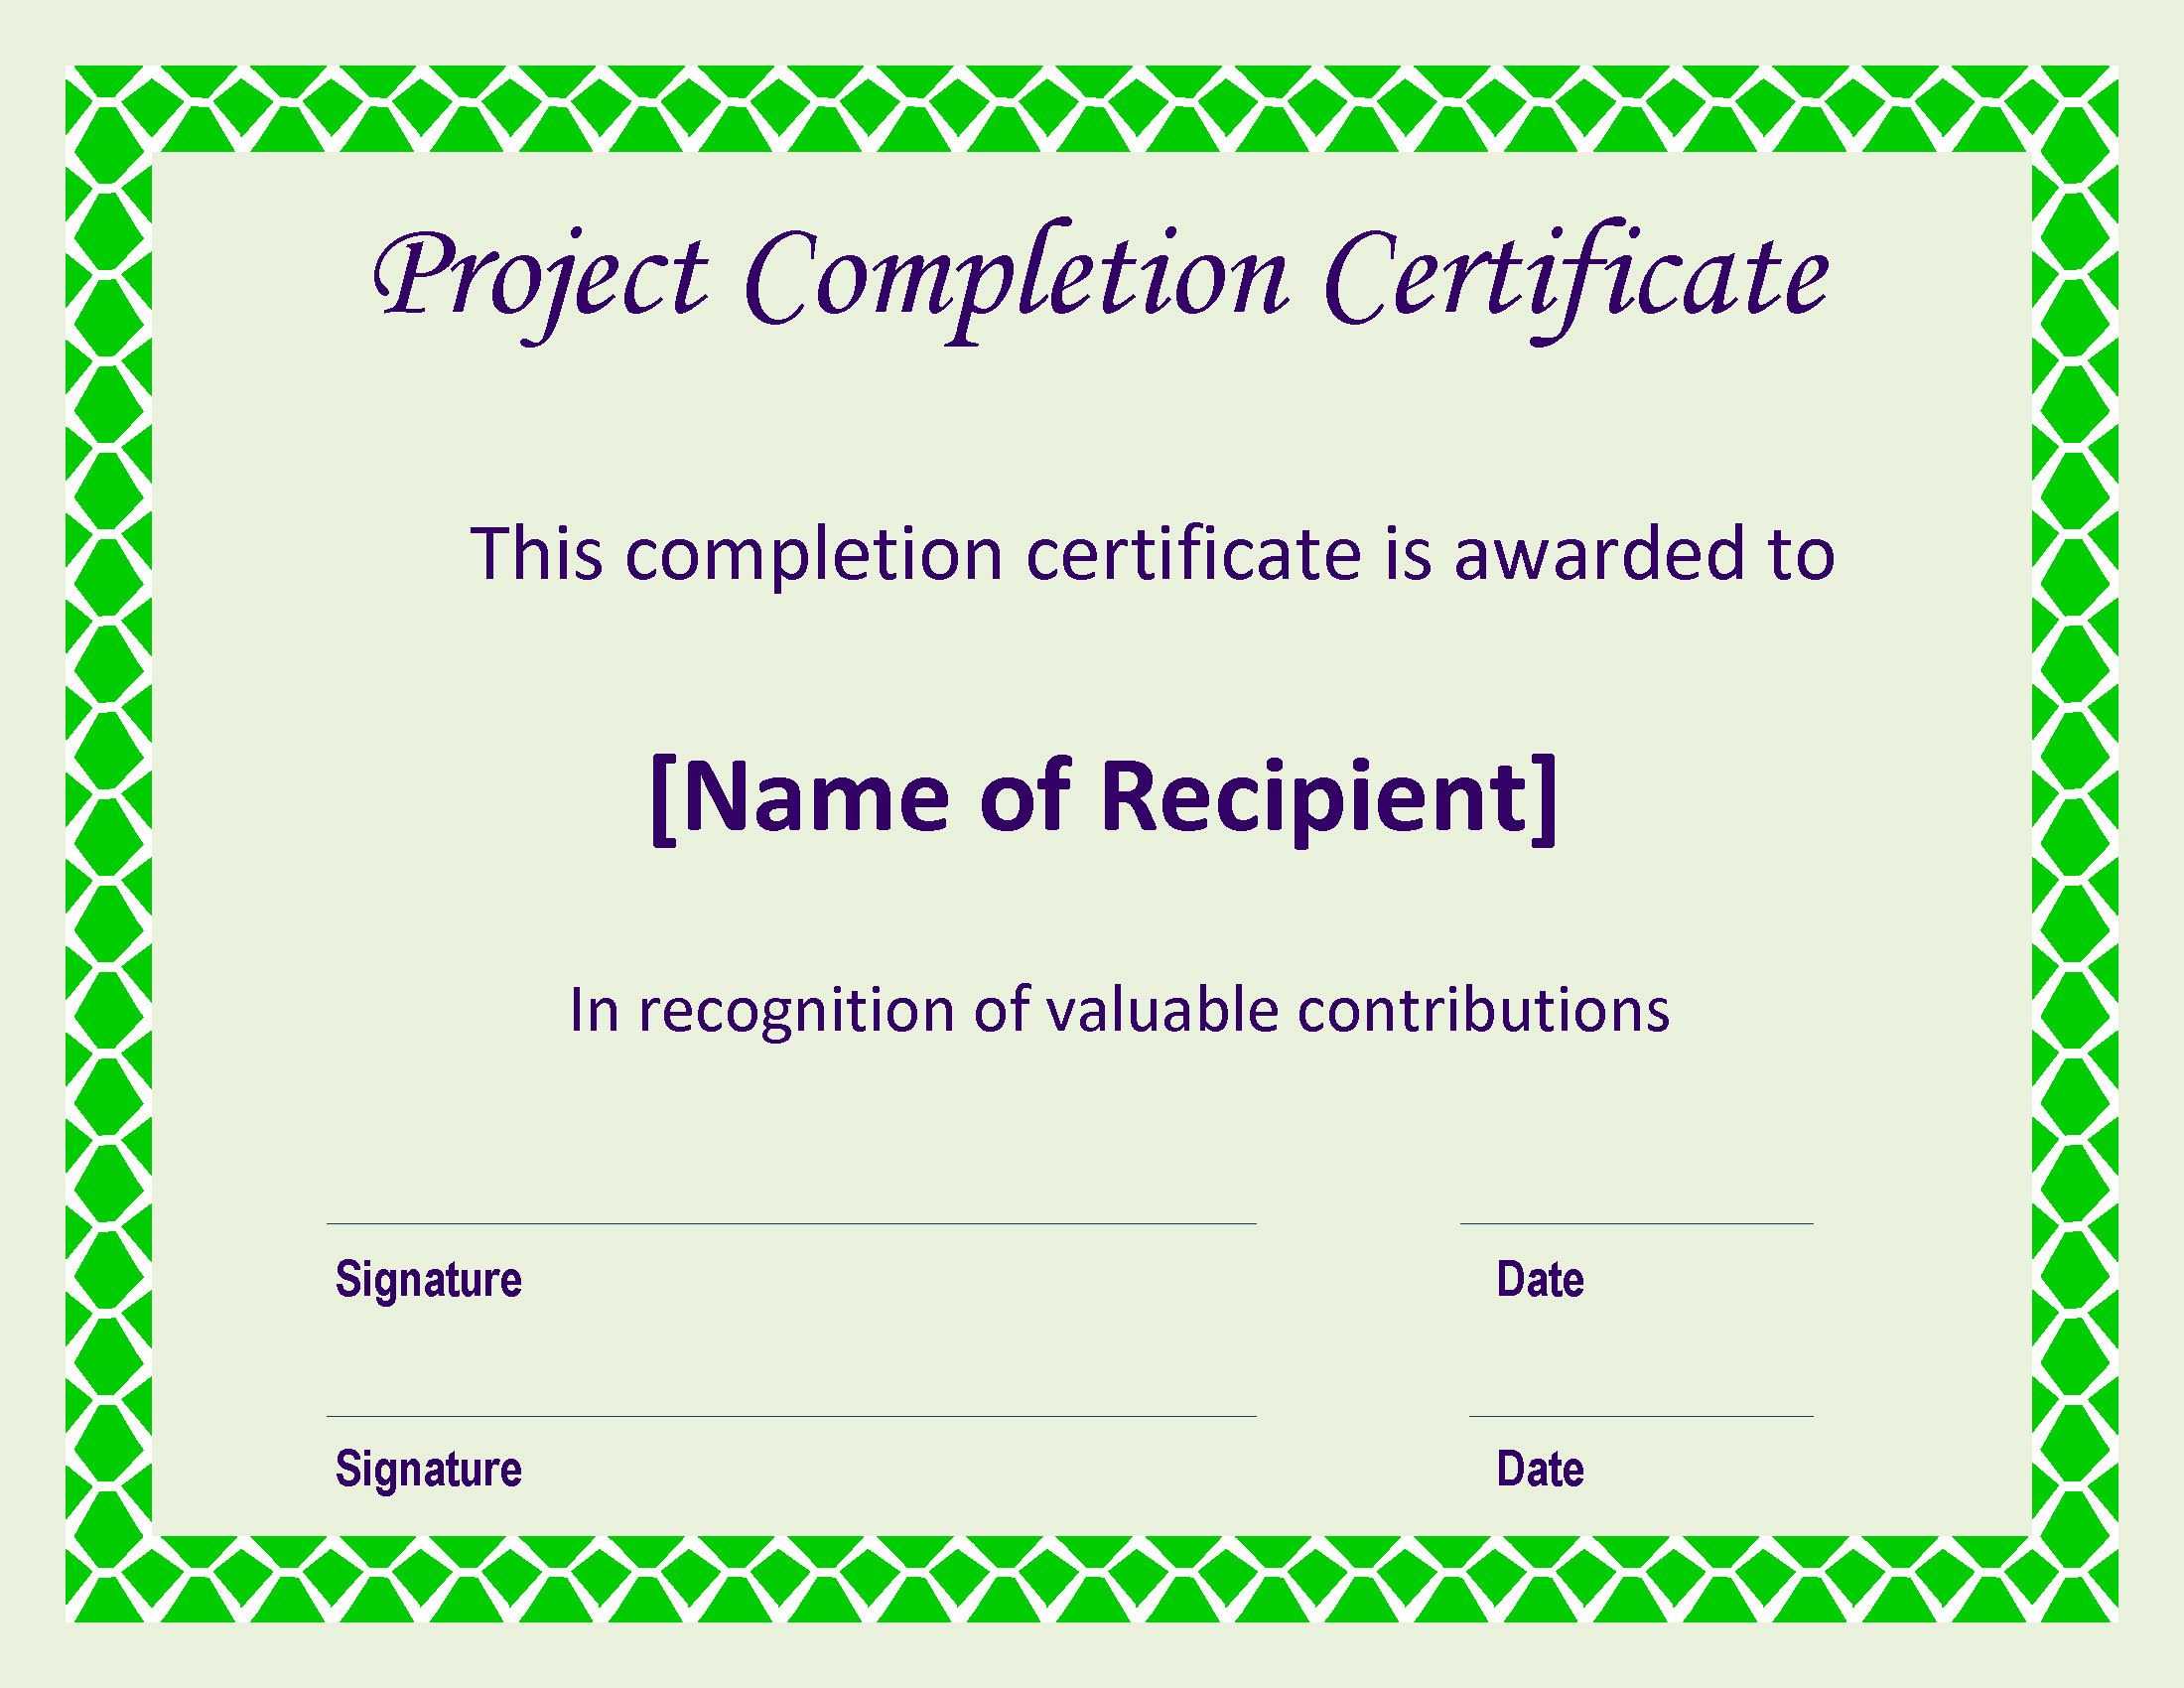 Certificate Of Completion Project | Templates At Throughout Construction Certificate Of Completion Template